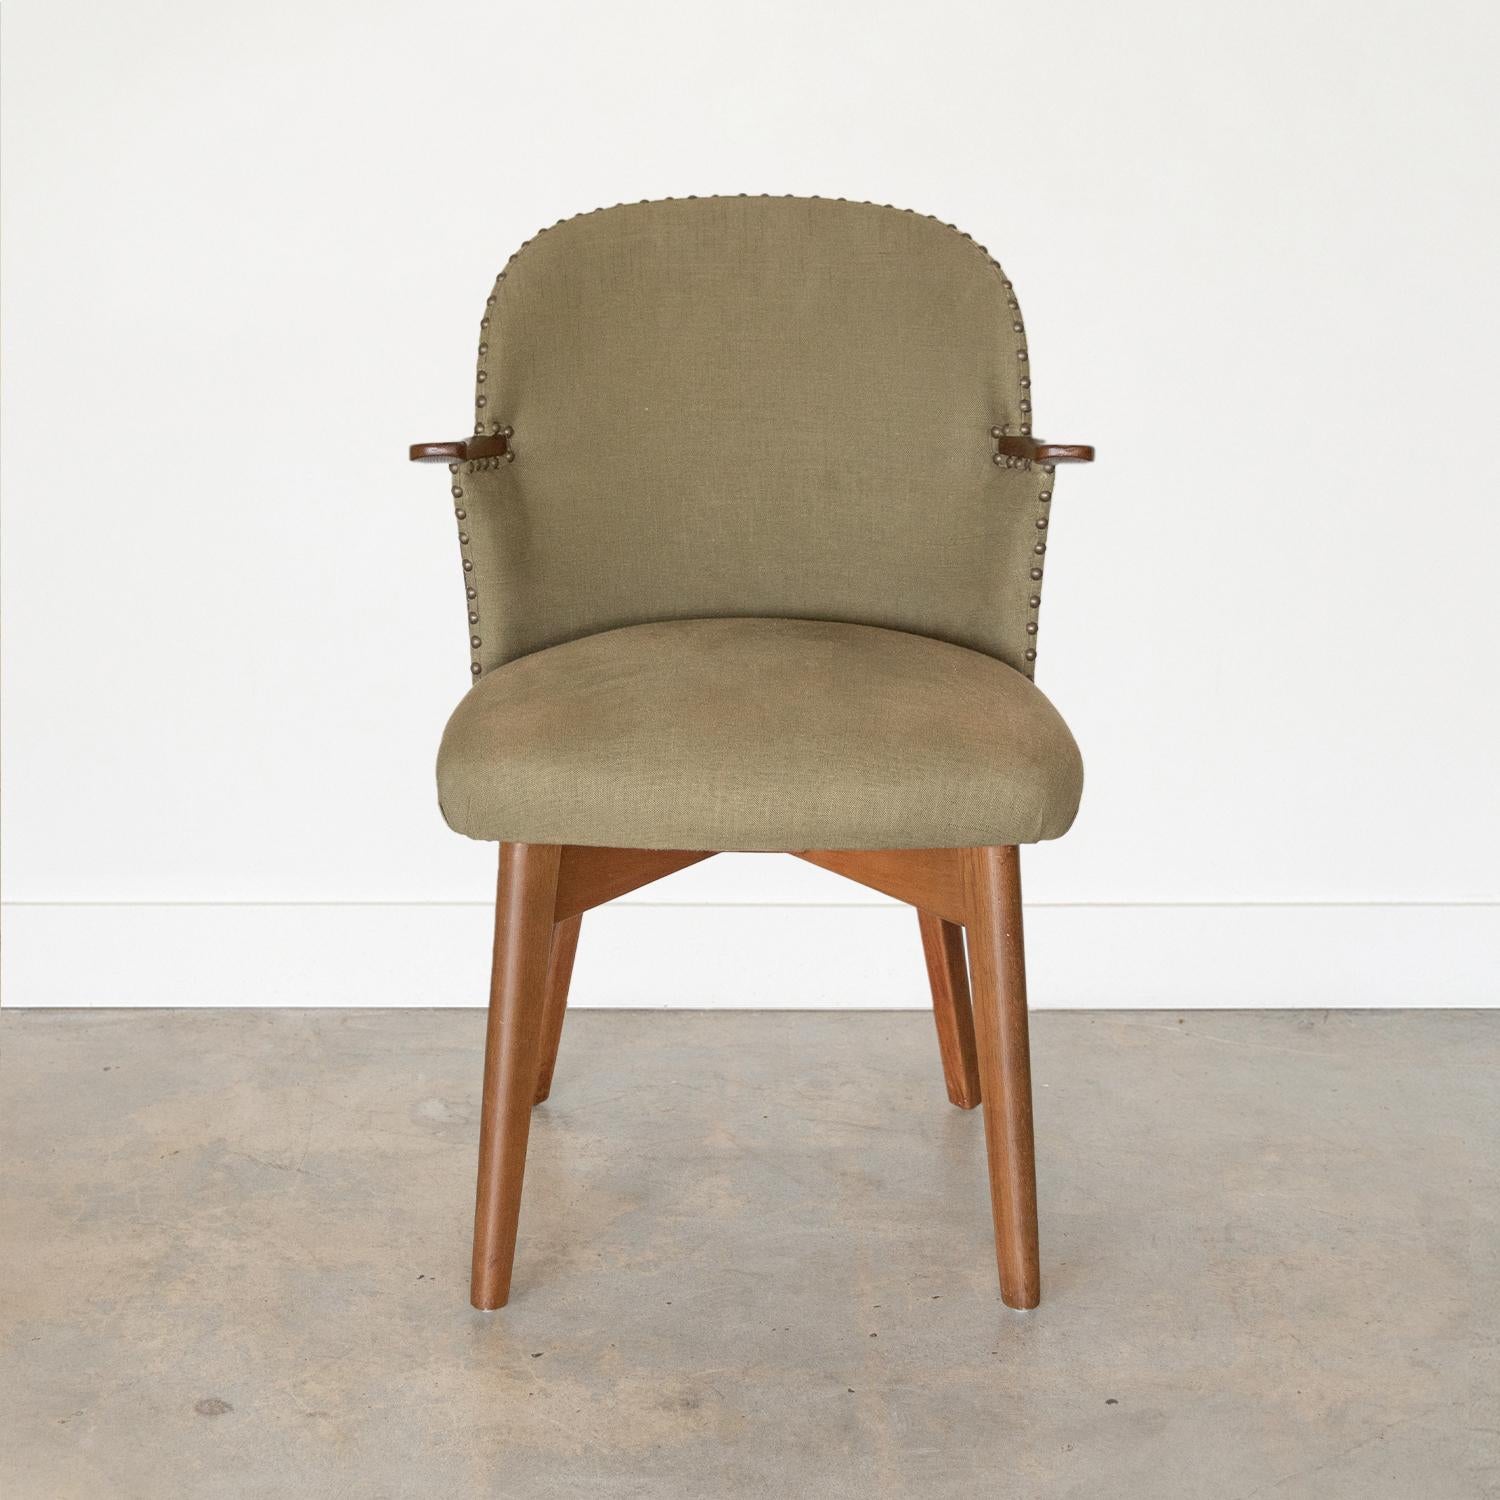 1960's Linen and Wood Chair In Good Condition For Sale In Los Angeles, CA